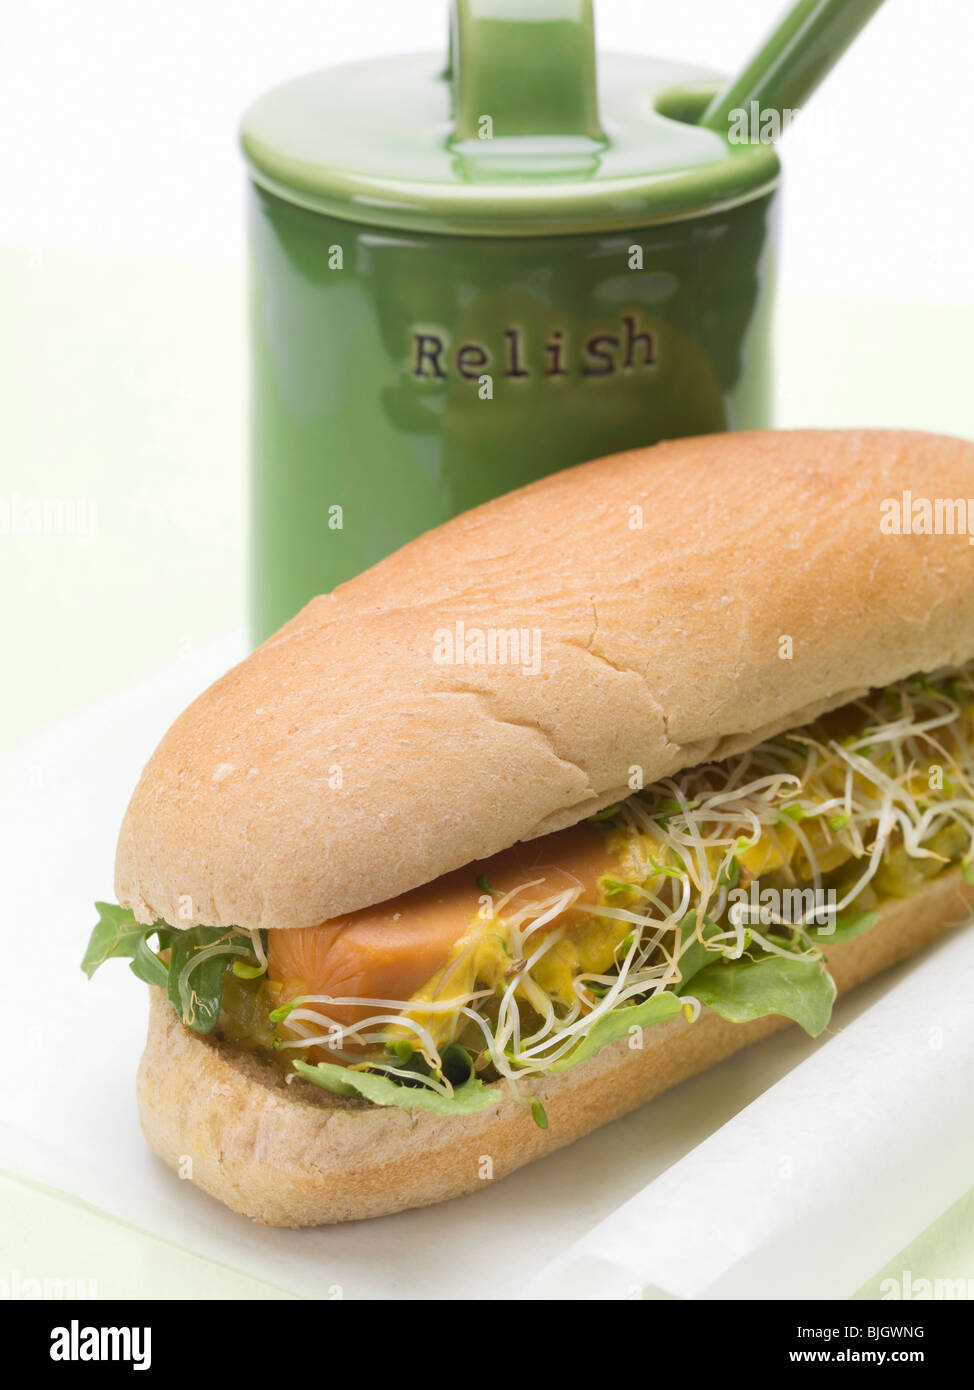 A hot dog with sprouts beside a relish pot - Stock Photo